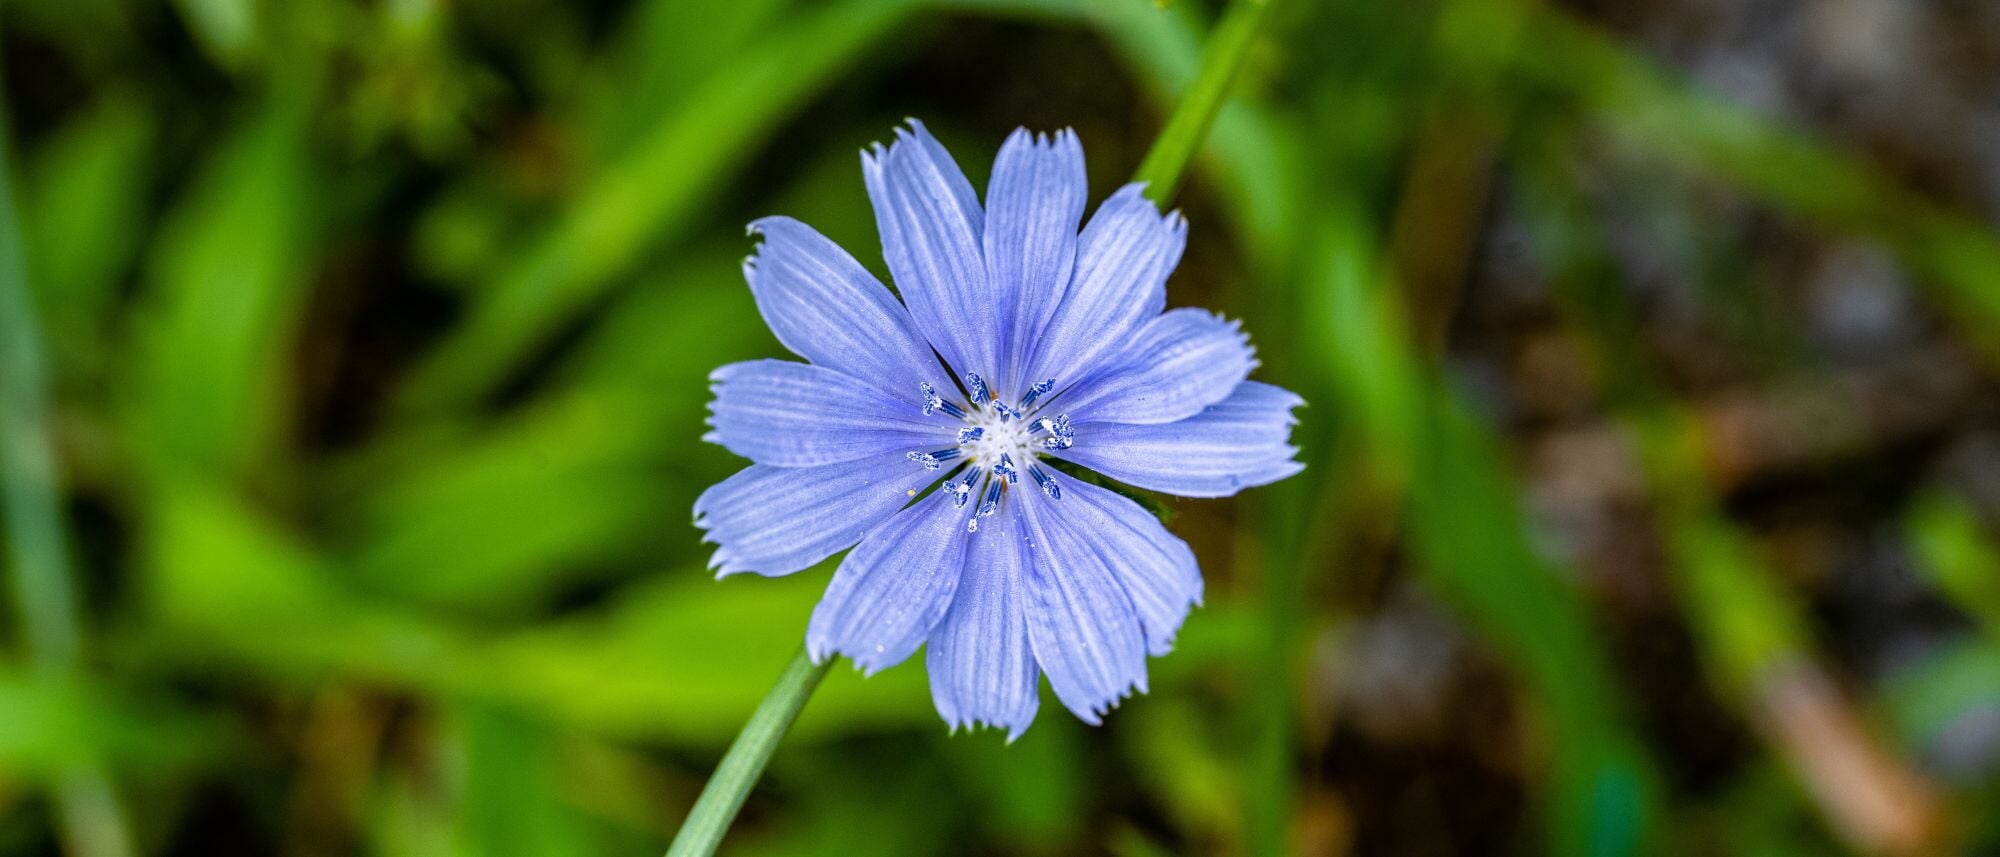 Grow your own coffee substitute in your garden with chicory seeds